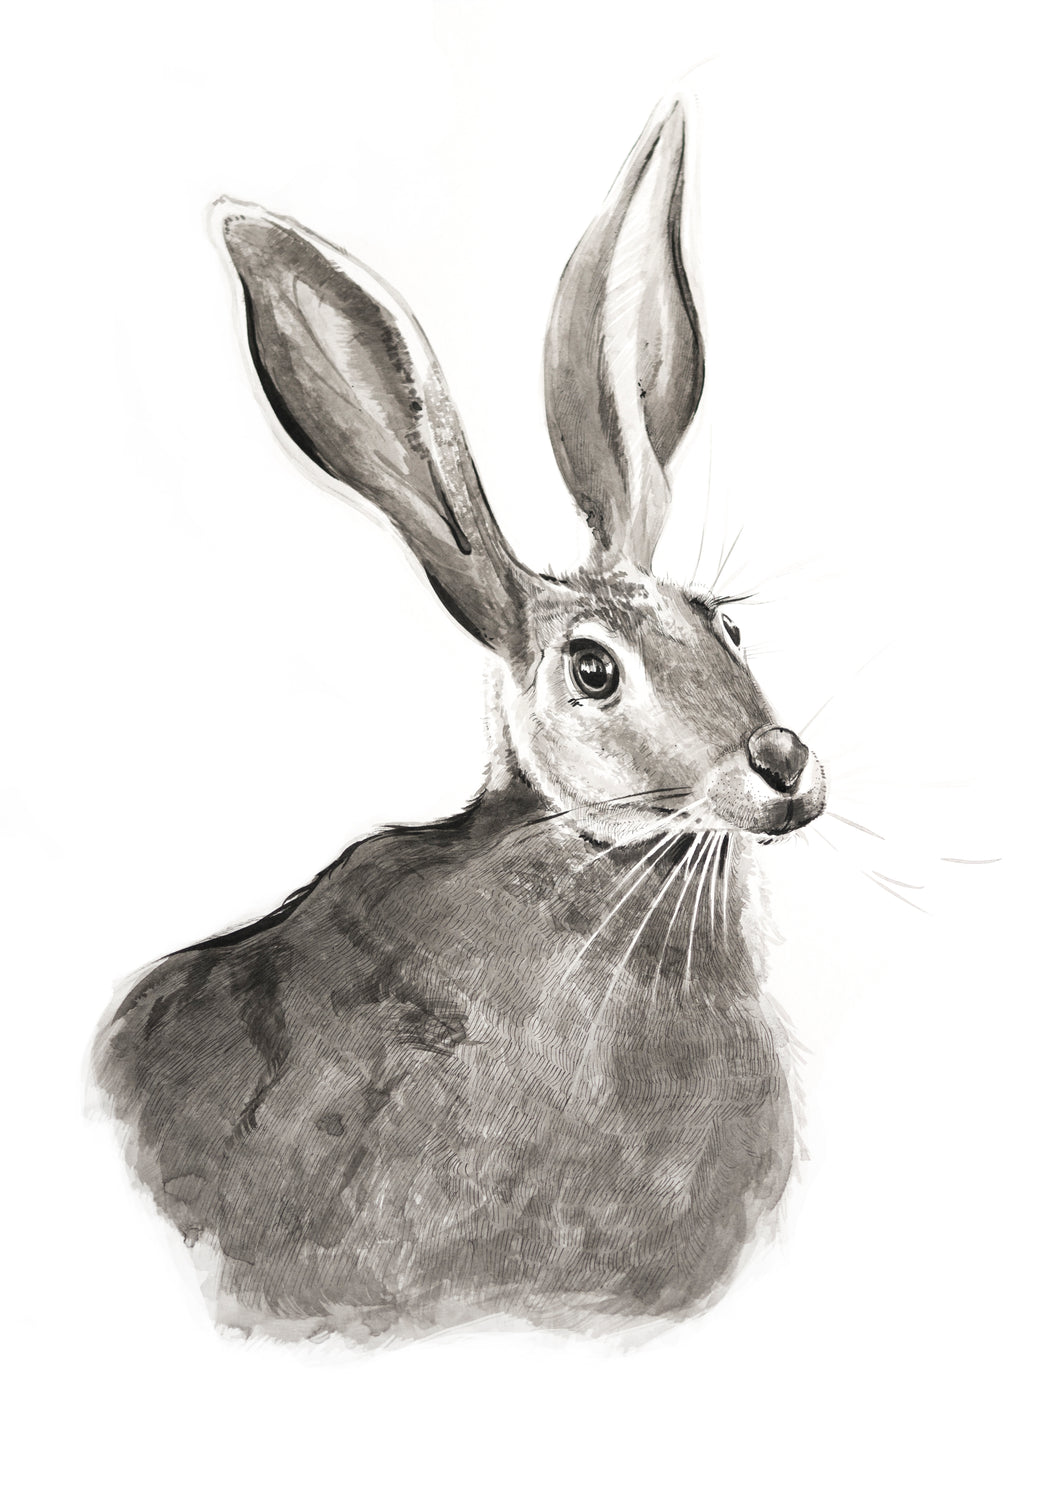 Hare print - About Face Illustration